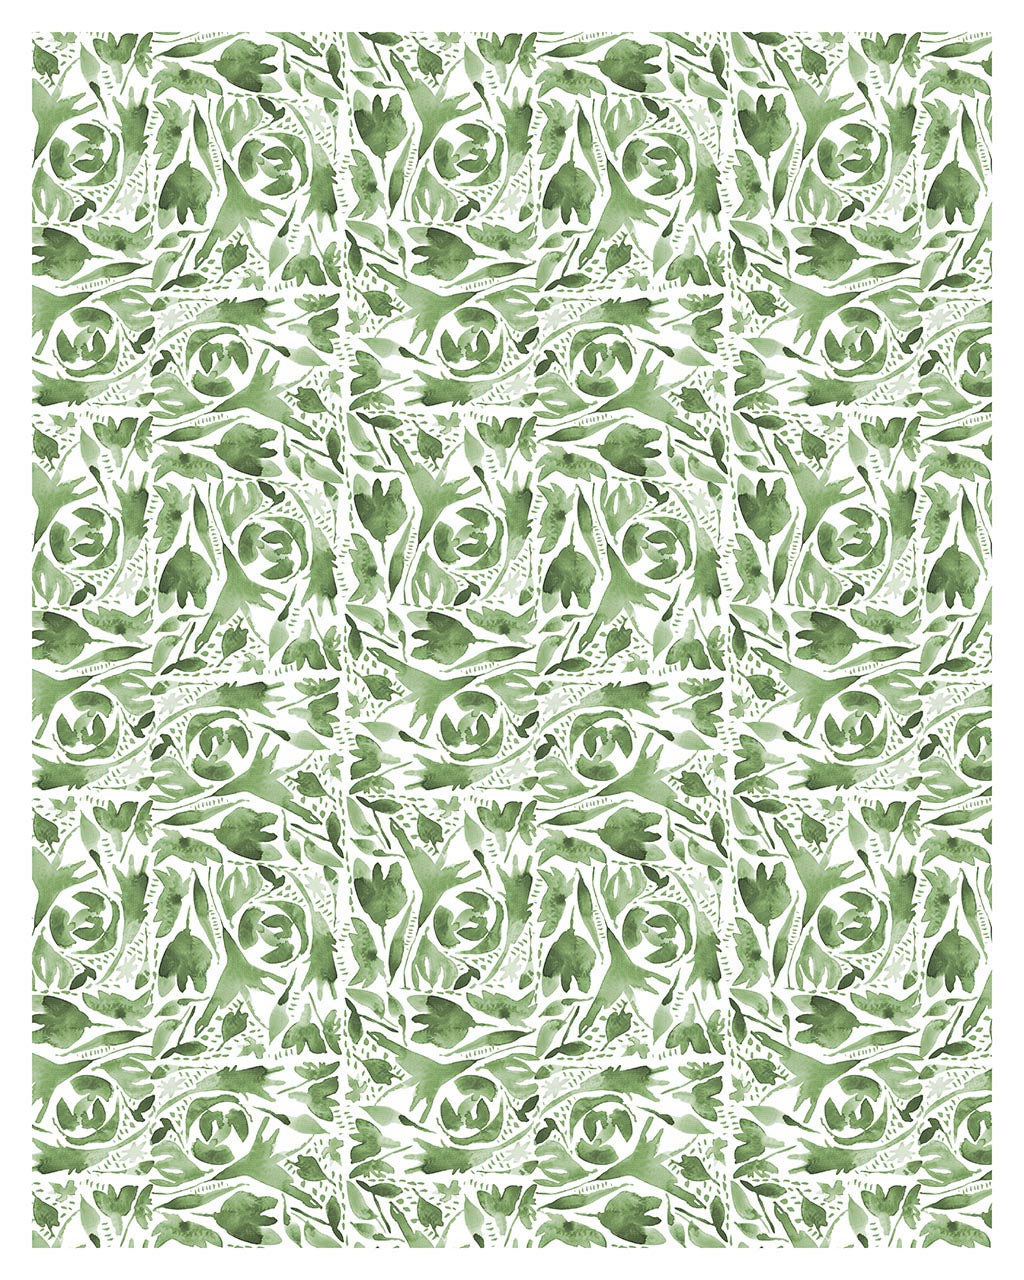 Repeating watercolor floral design in sage greens. Print measures 16x20 inches